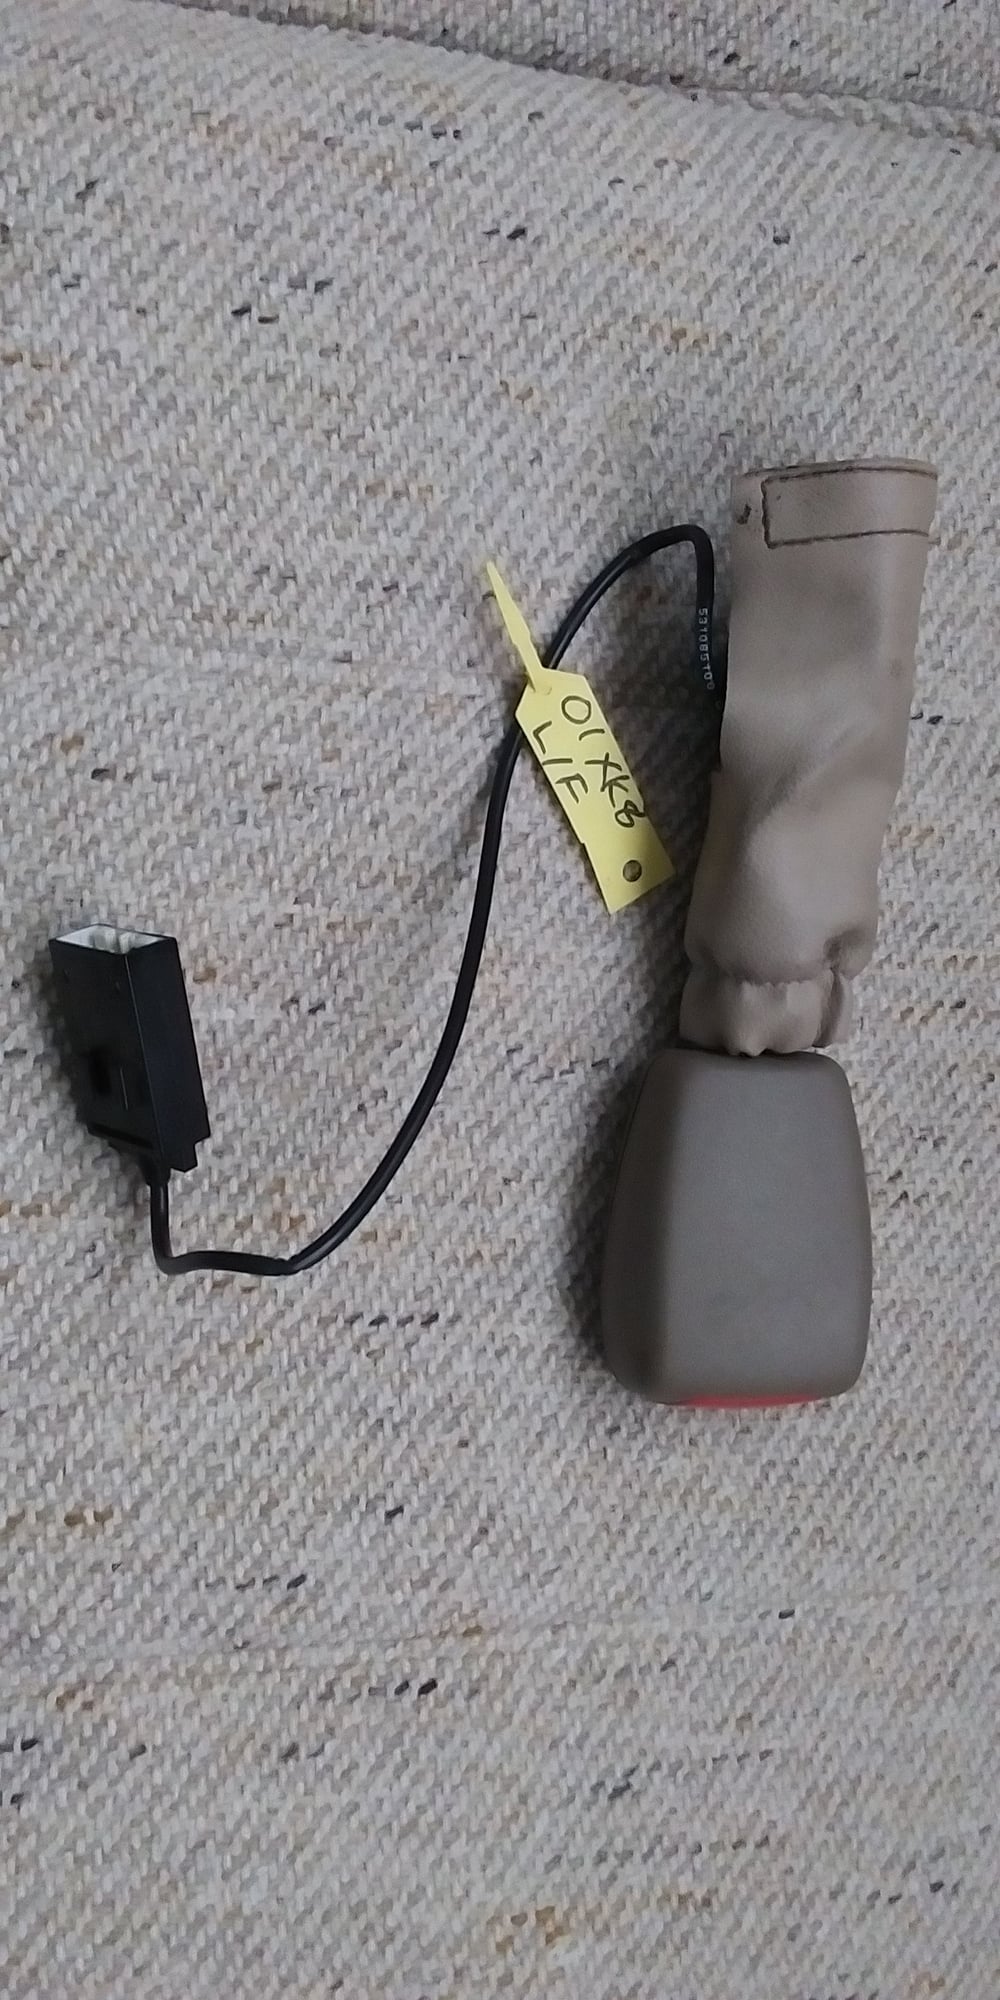 Interior/Upholstery - XK8 front seat belt receiver (Female side of seat belt) - Used - 1997 to 2005 Jaguar XK8 - Inverness, FL 34453, United States